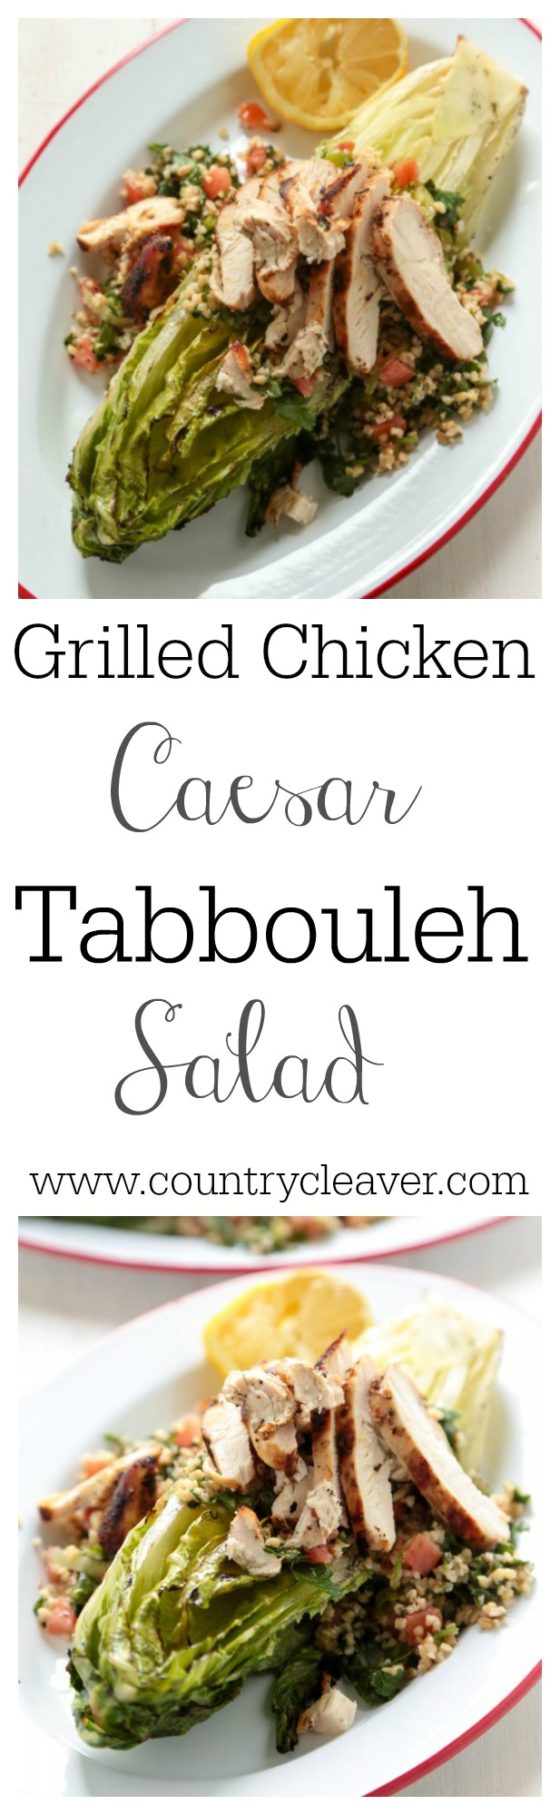 Grilled Chicken Caesar Tabbouleh Salad--www.countrycleaver.com